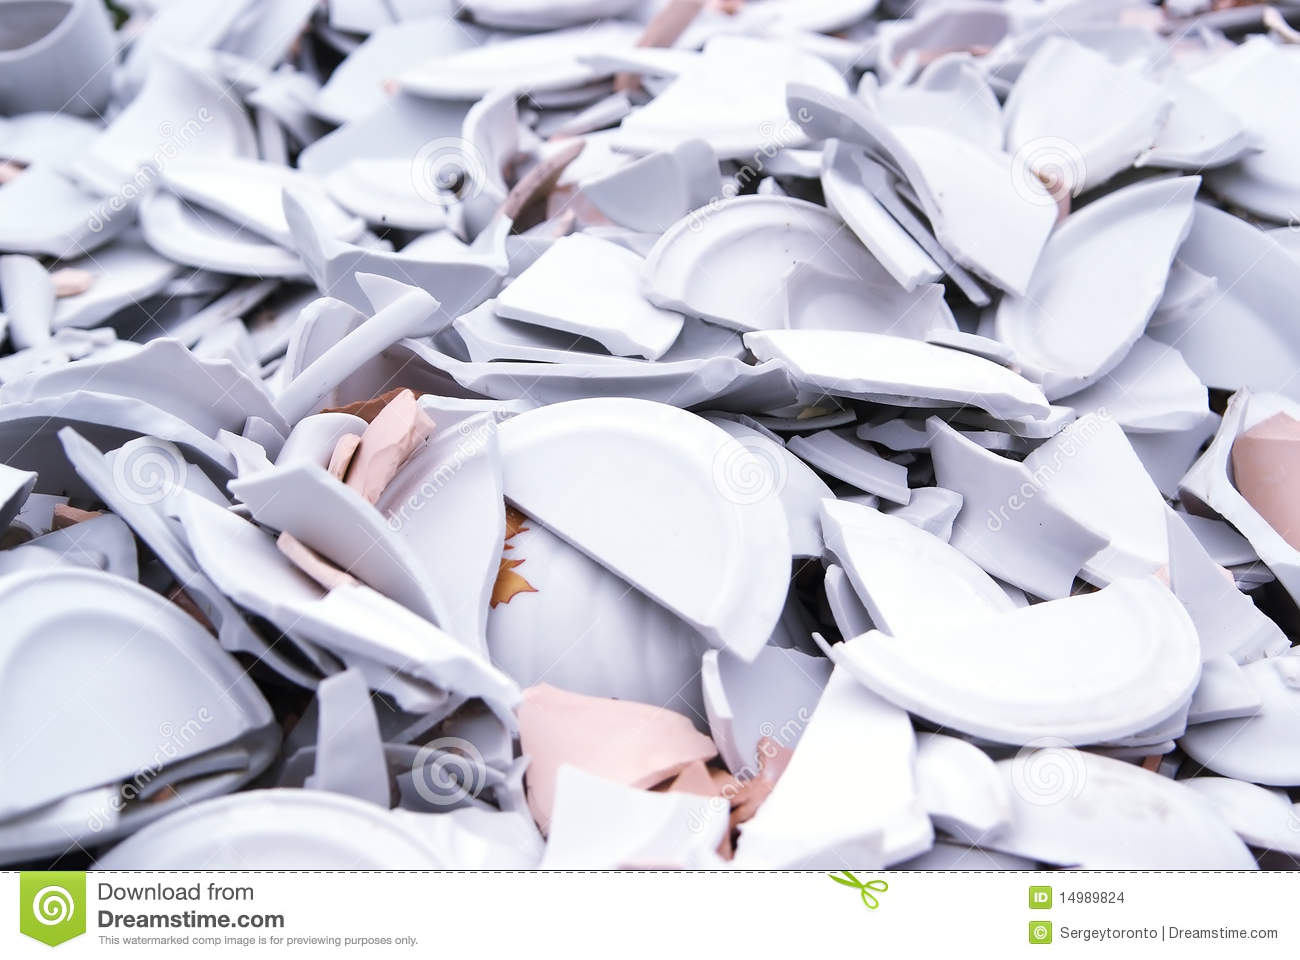 Broken Porcelain Plates And Dishes Stock Images   Image  14989824